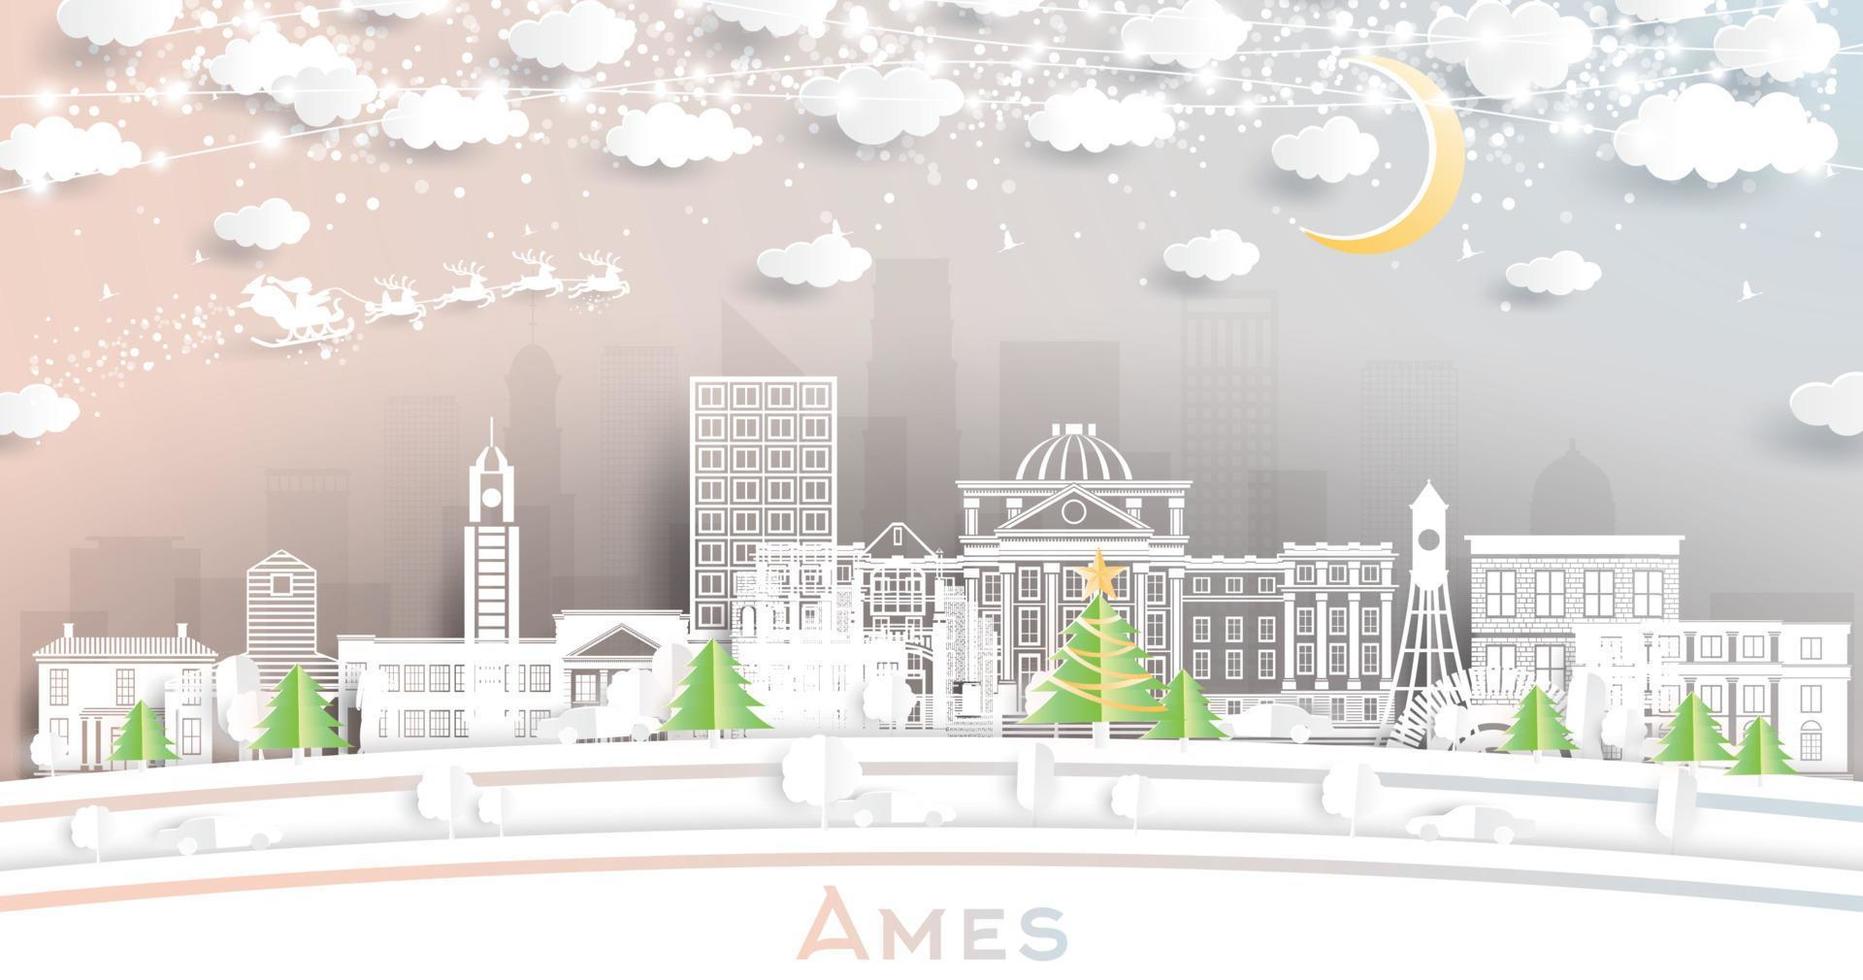 Ames Iowa City Skyline in Paper Cut Style with Snowflakes, Moon and Neon Garland. vector